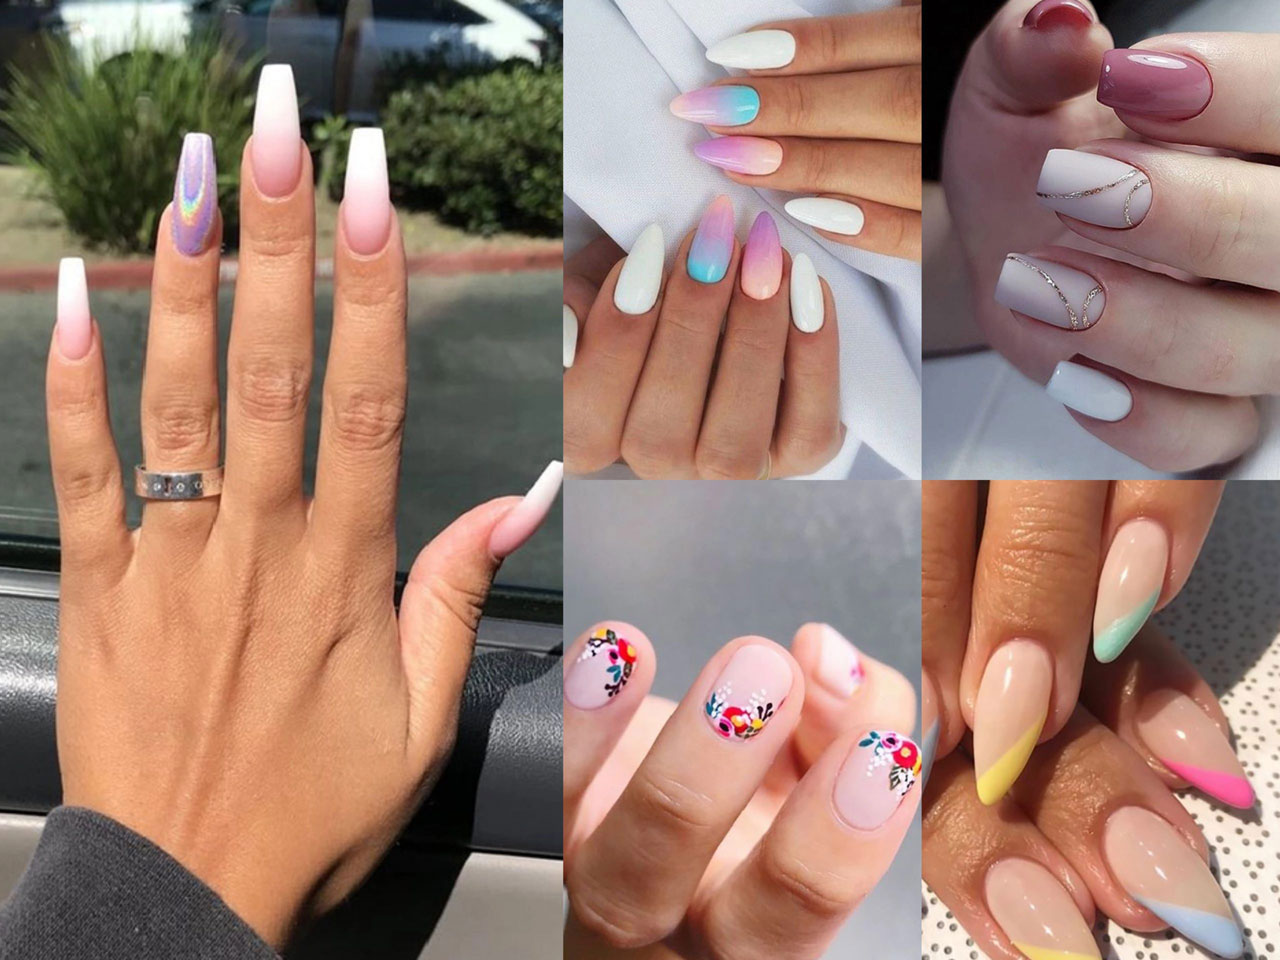 1. "Top 10 Summer Nail Colors for 2020" - wide 4